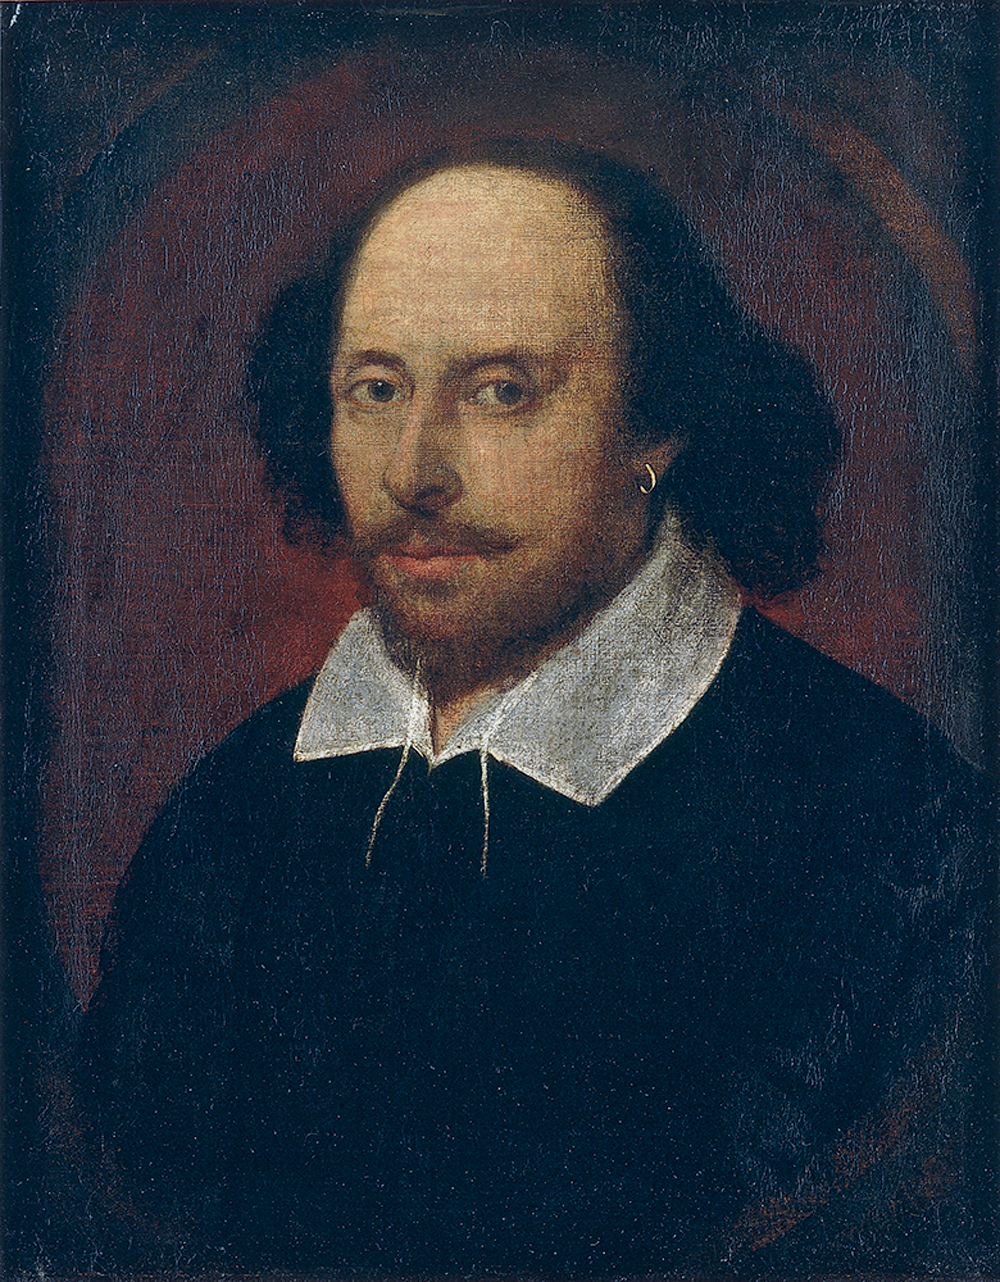 London’s Portrait of William Shakespeare by John Taylor.